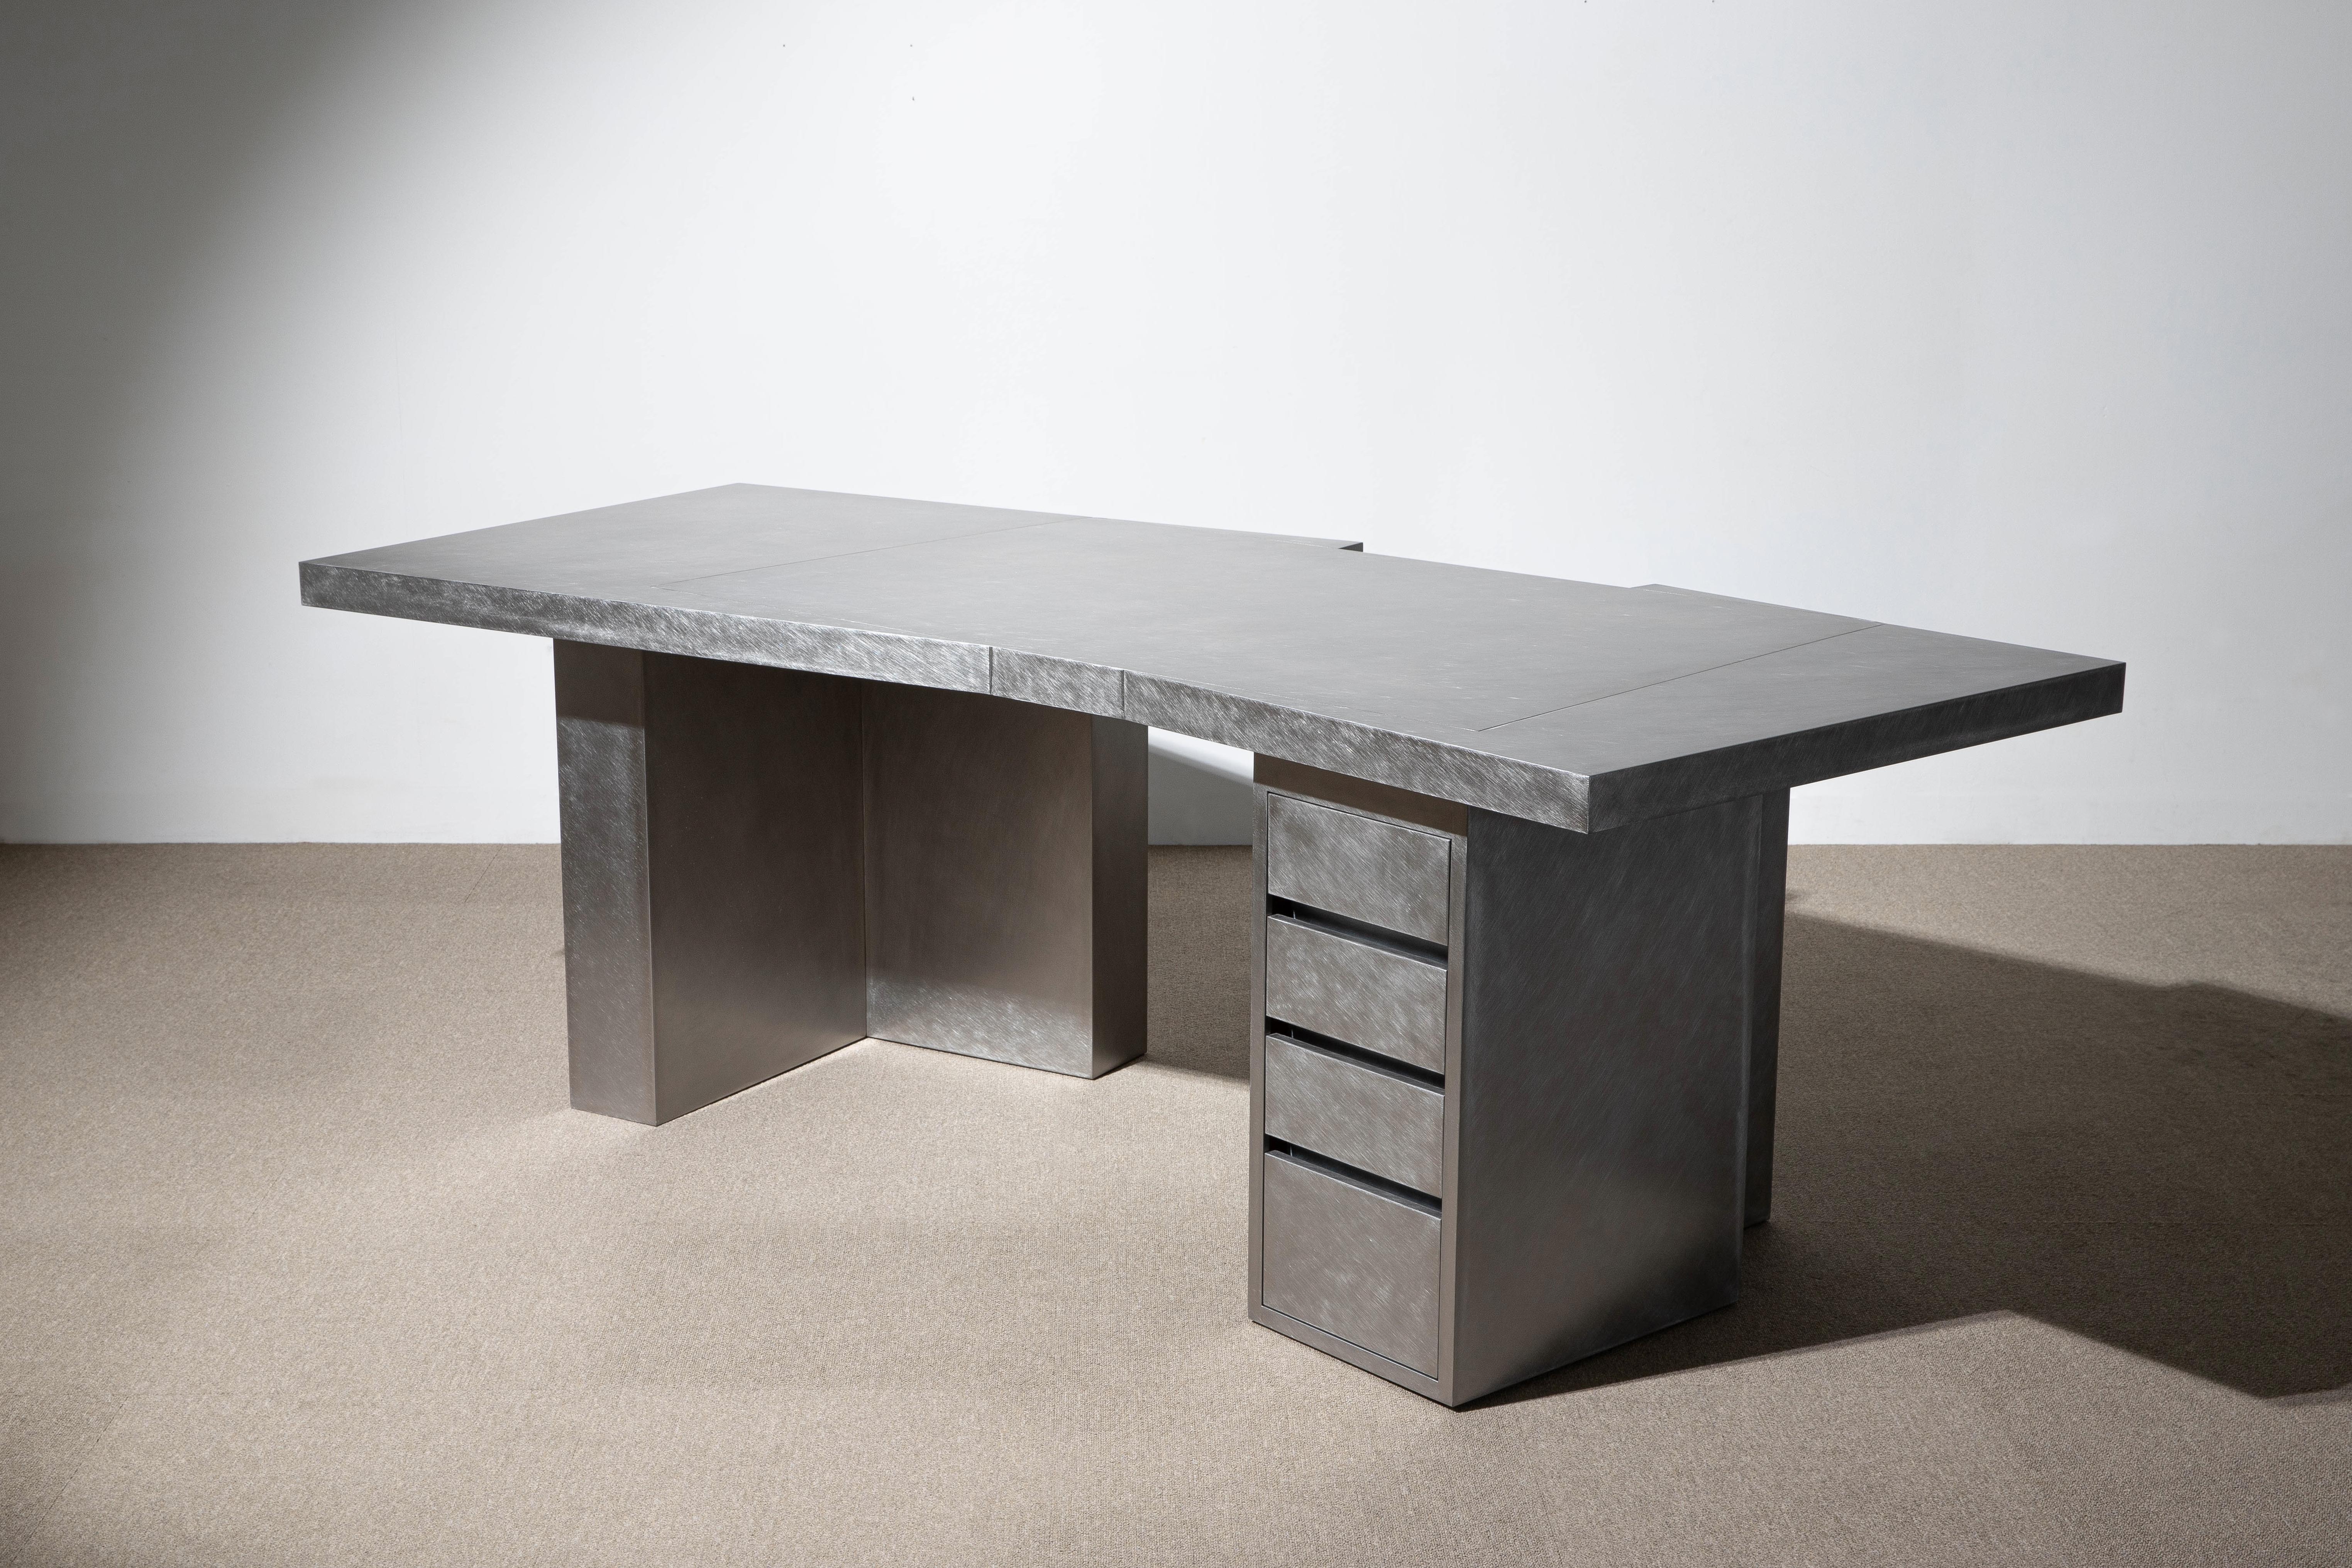 Layered steel desk by Hyungshin Hwang
Dimensions: D 230 x W 110 x H 75 cm
Materials: stainless steel

Layered Series is the main theme and concept of work of Hwang, who continues his experiment which is based on architectural composition of